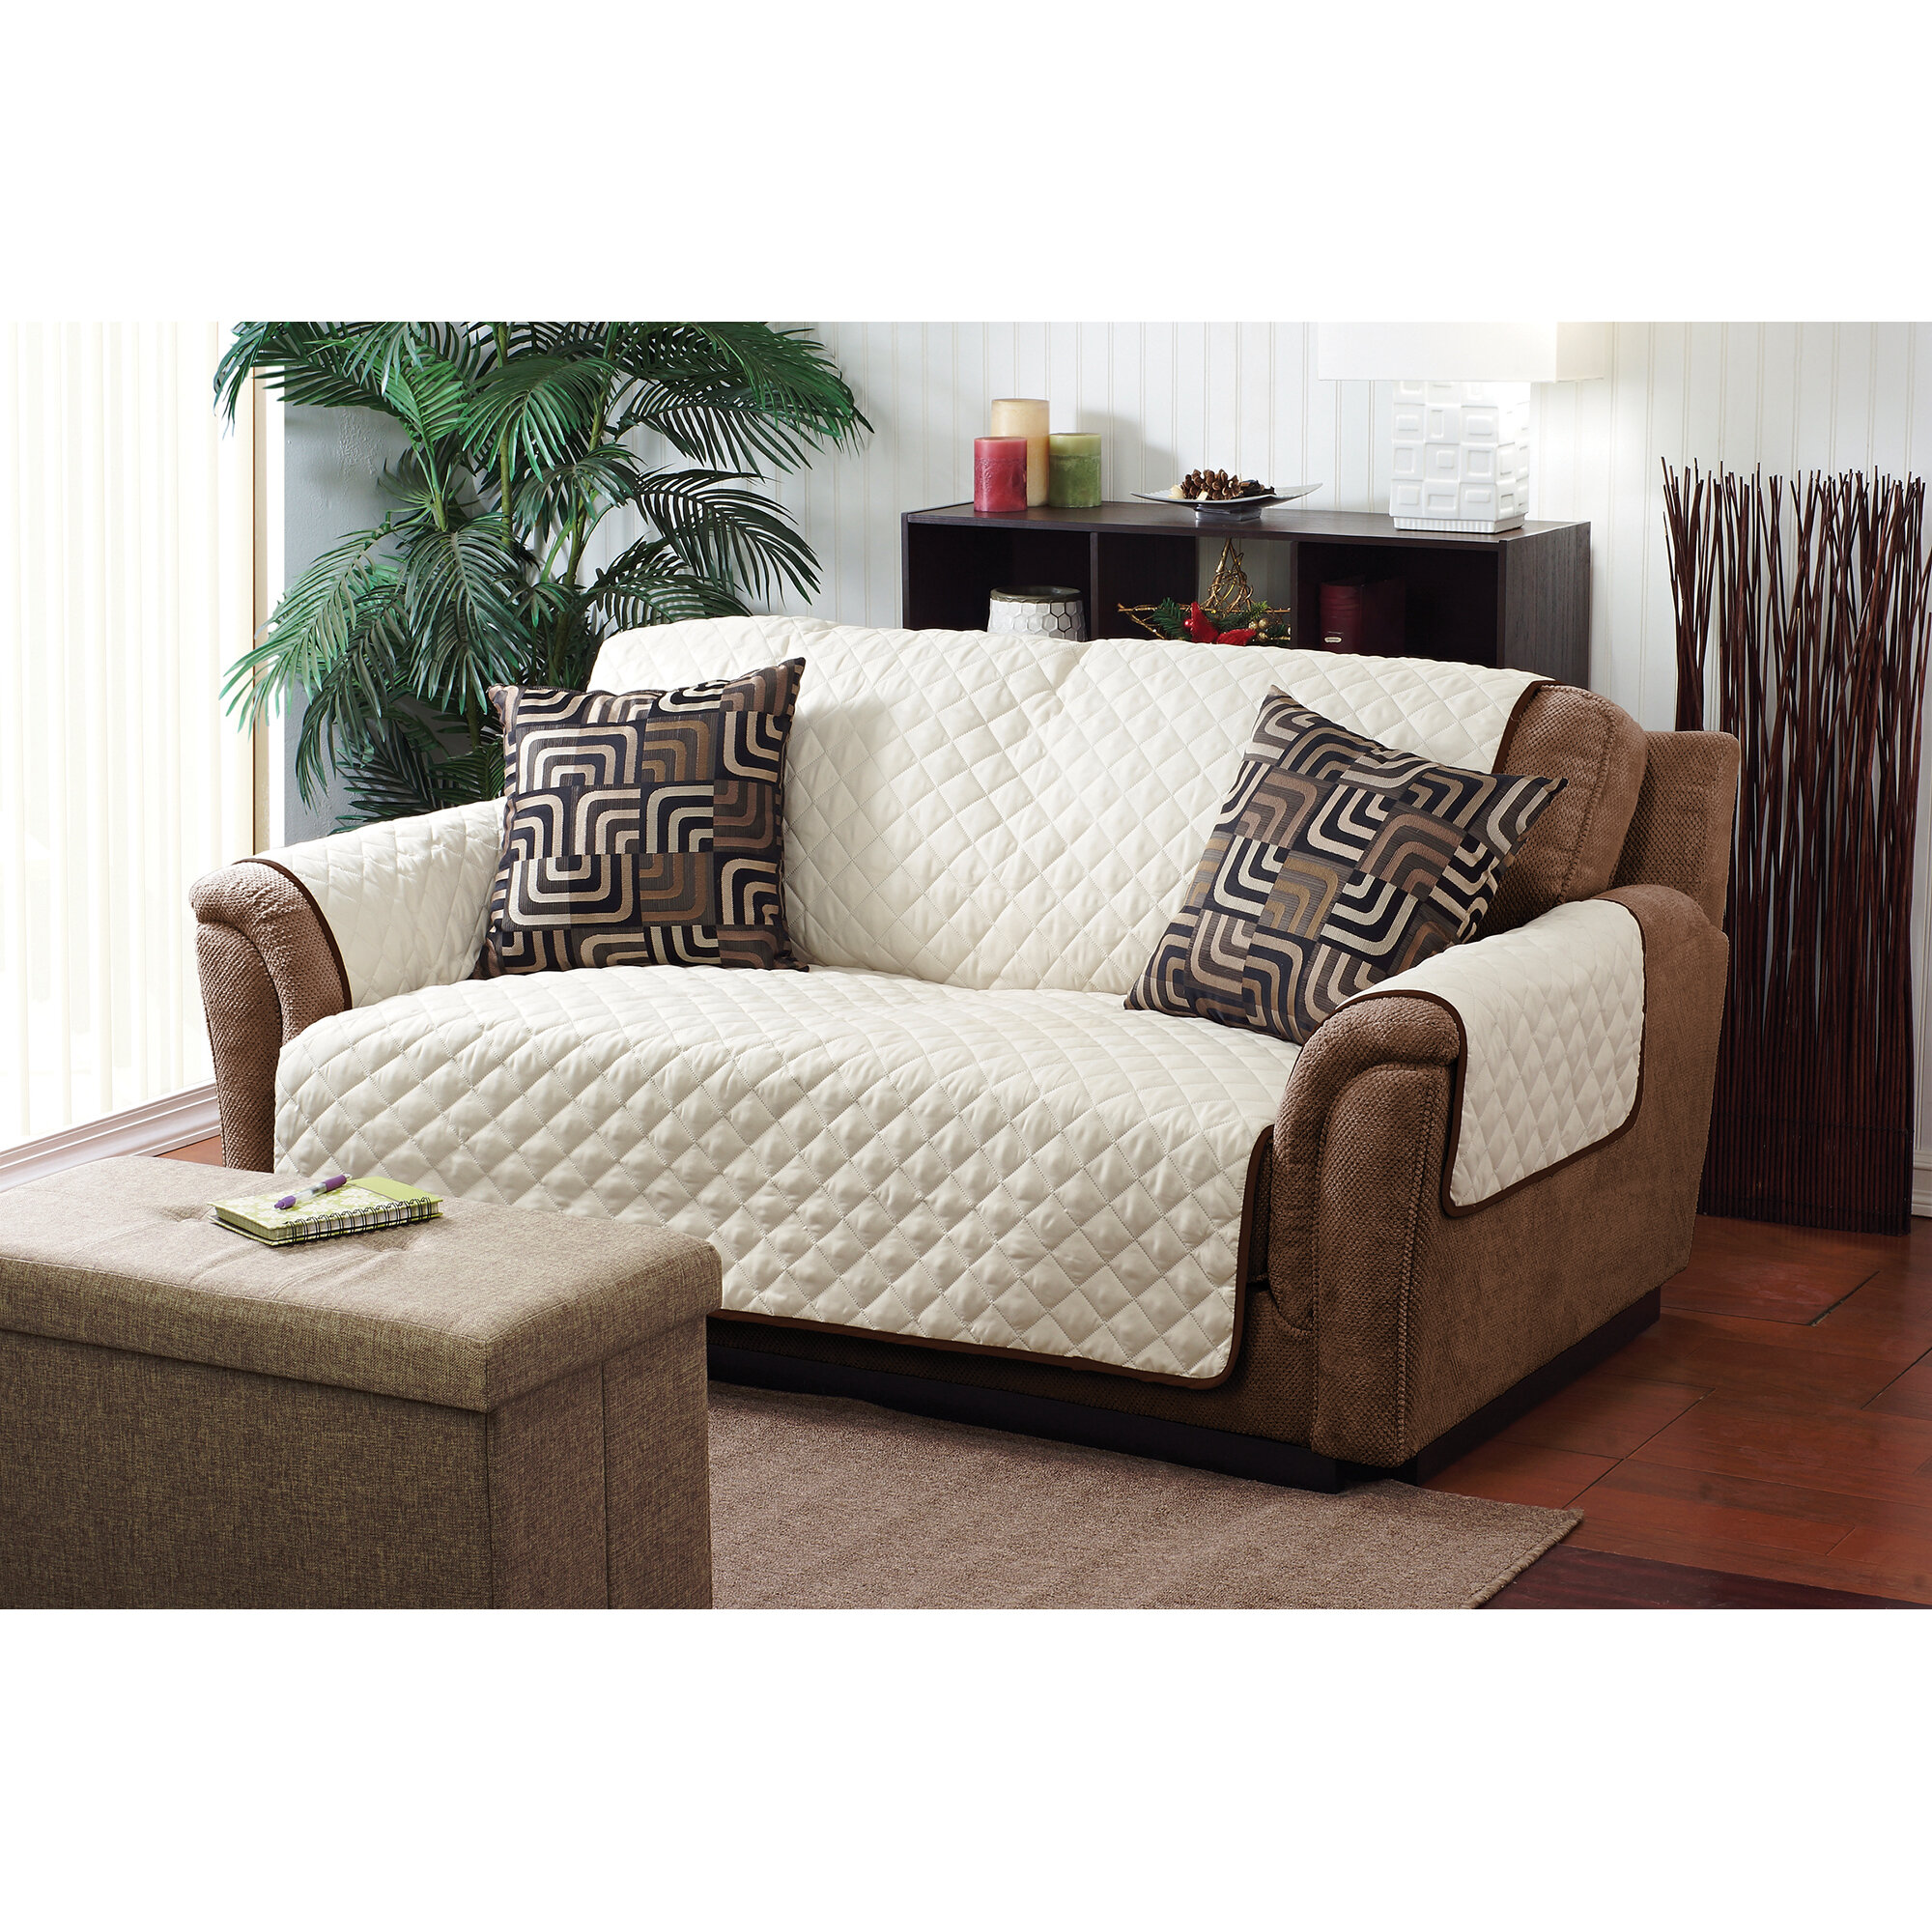 double sided settee